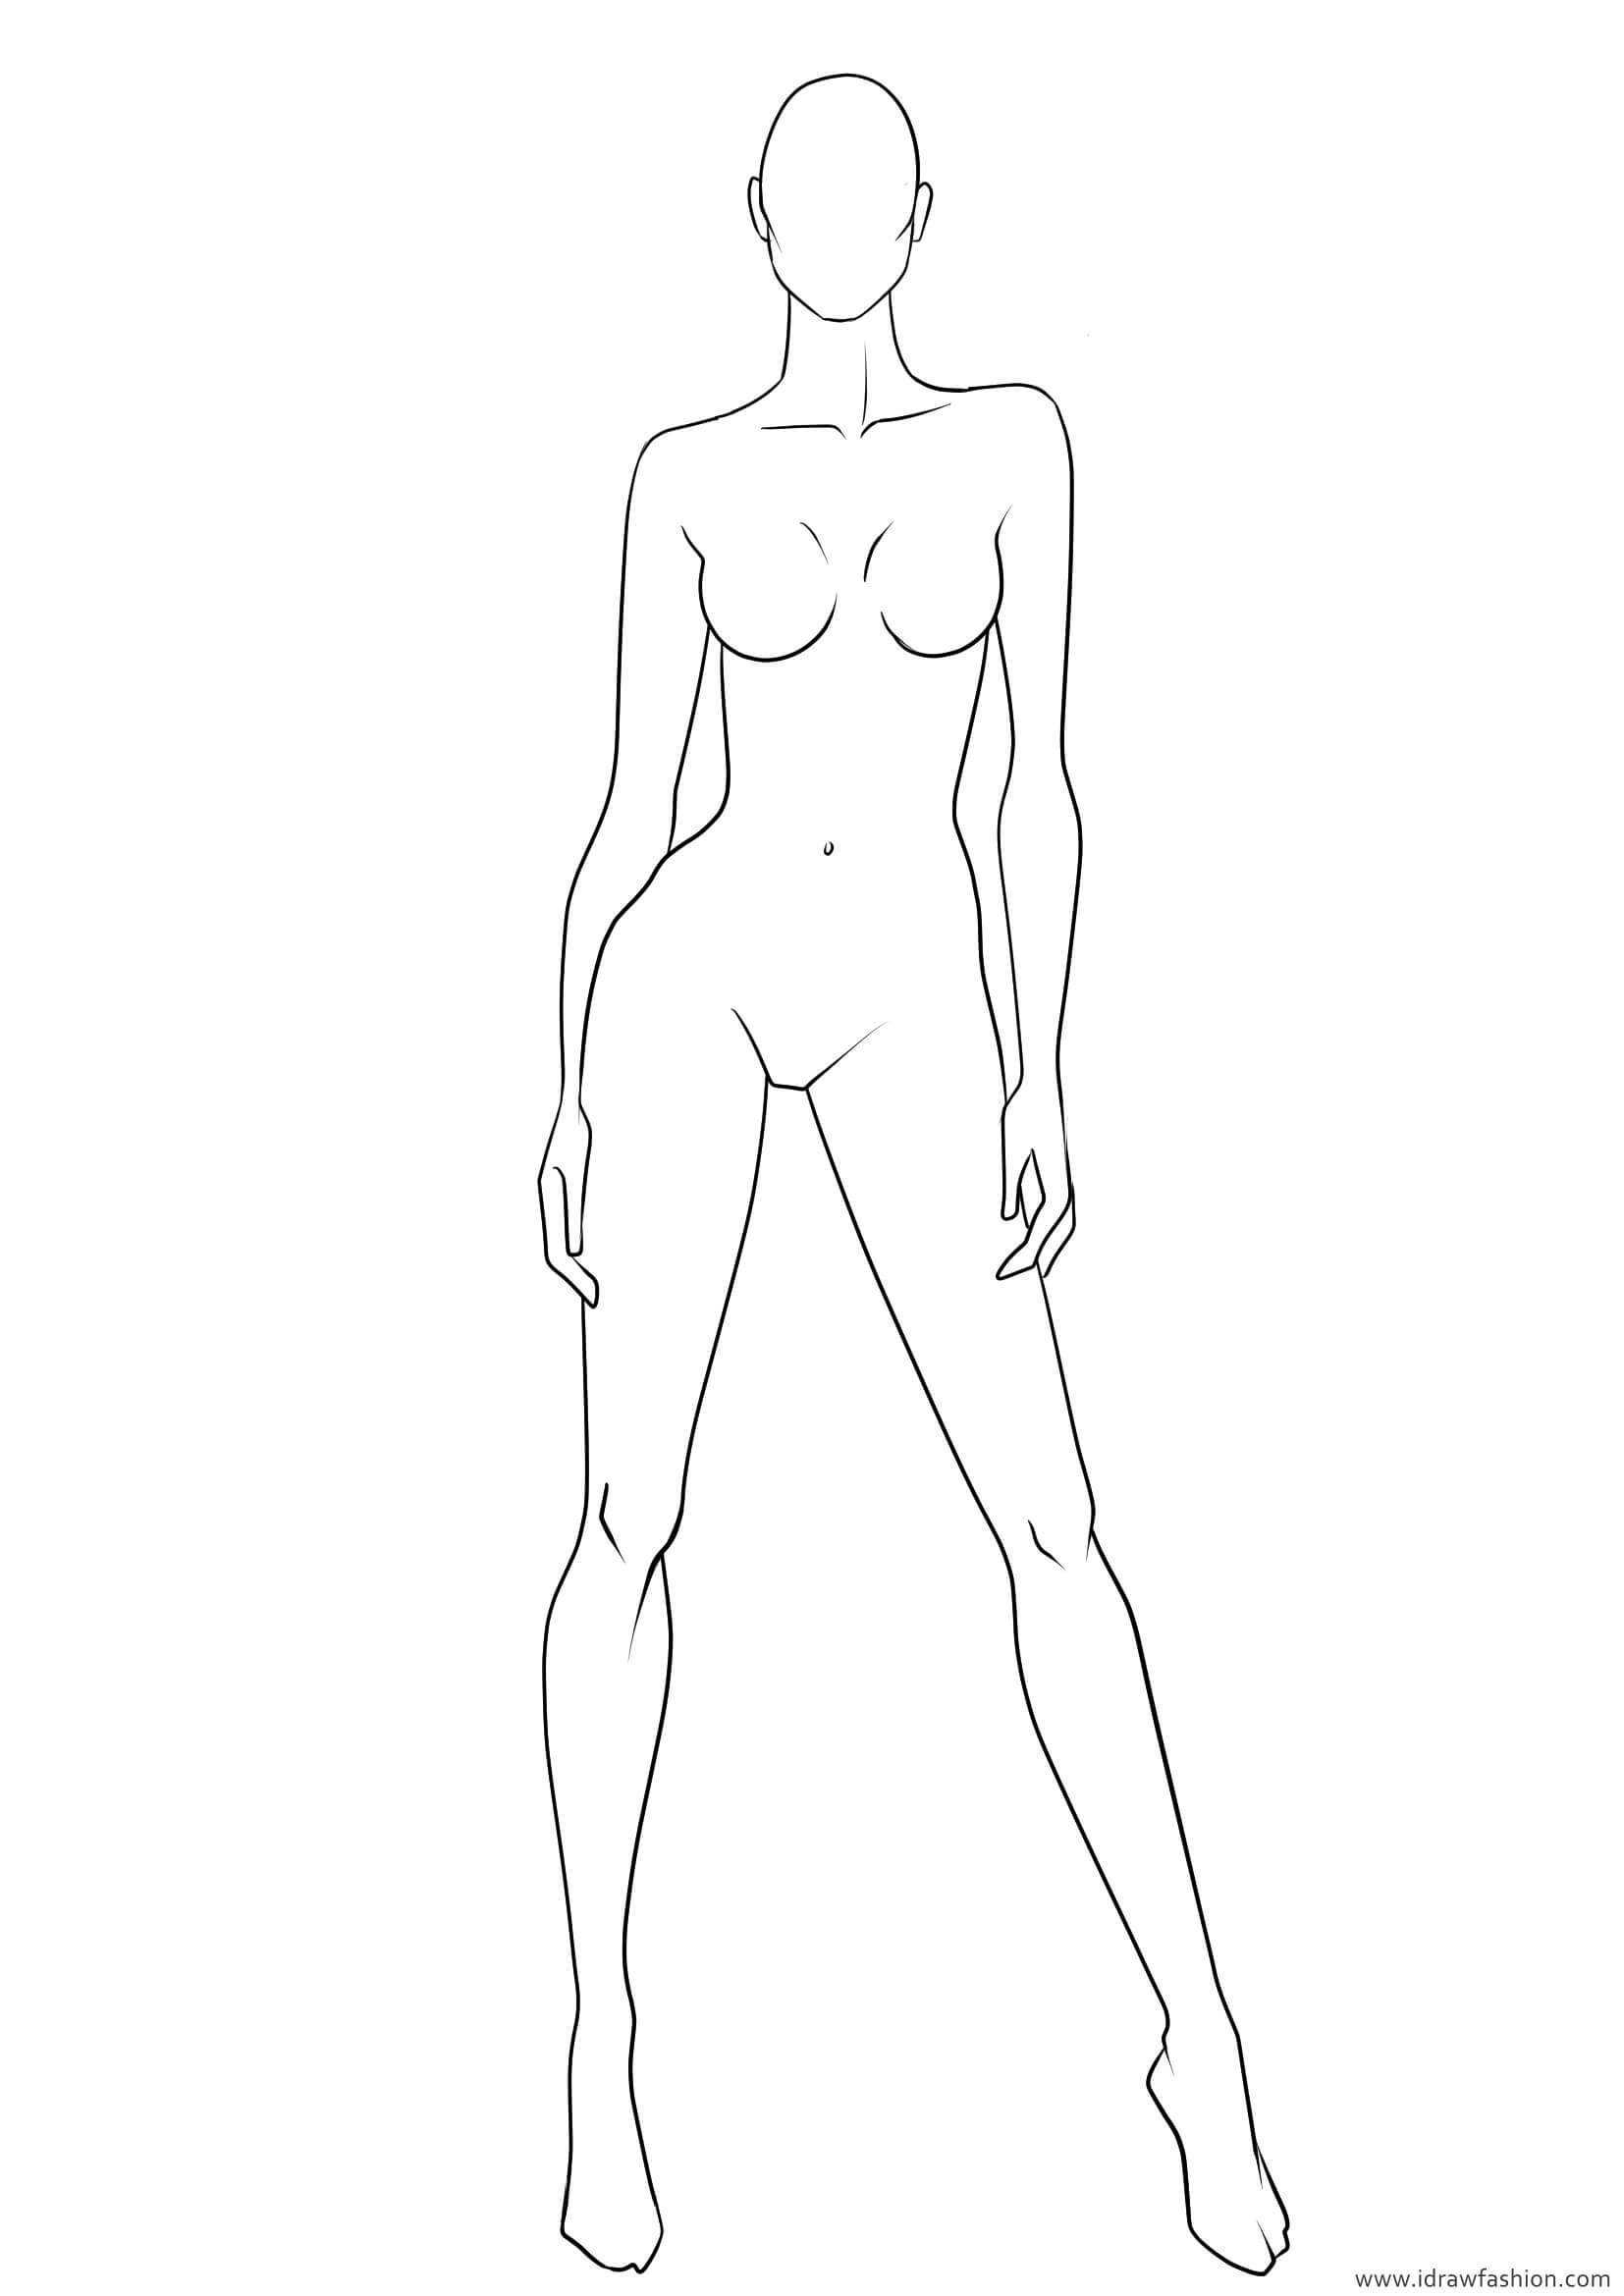 Blank Body Sketch At Paintingvalley | Explore Collection Within Blank Model Sketch Template